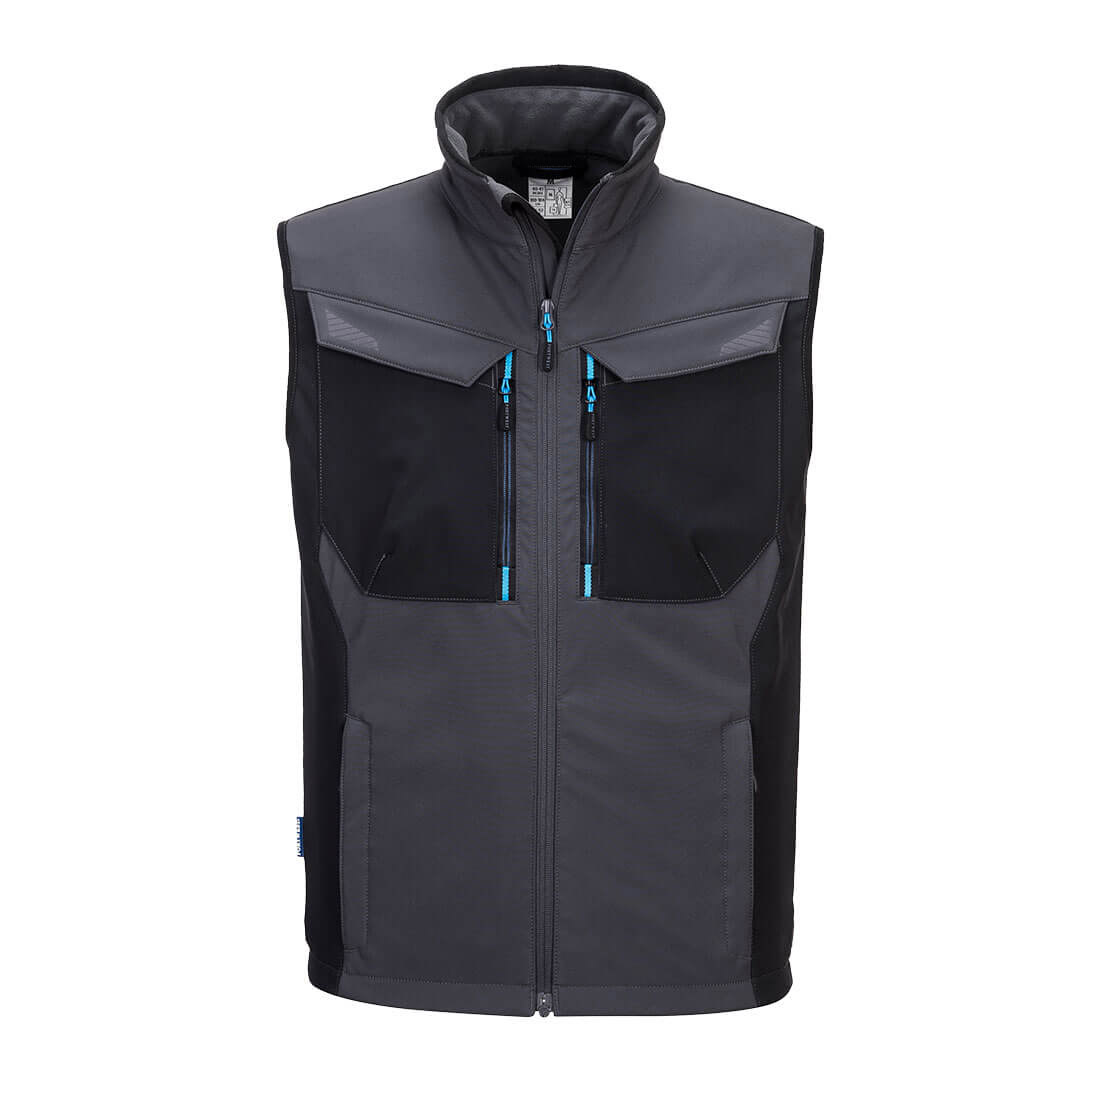 Luxury Breathable Windproof Waterproof Softshell Gilet with Reflective Trims 